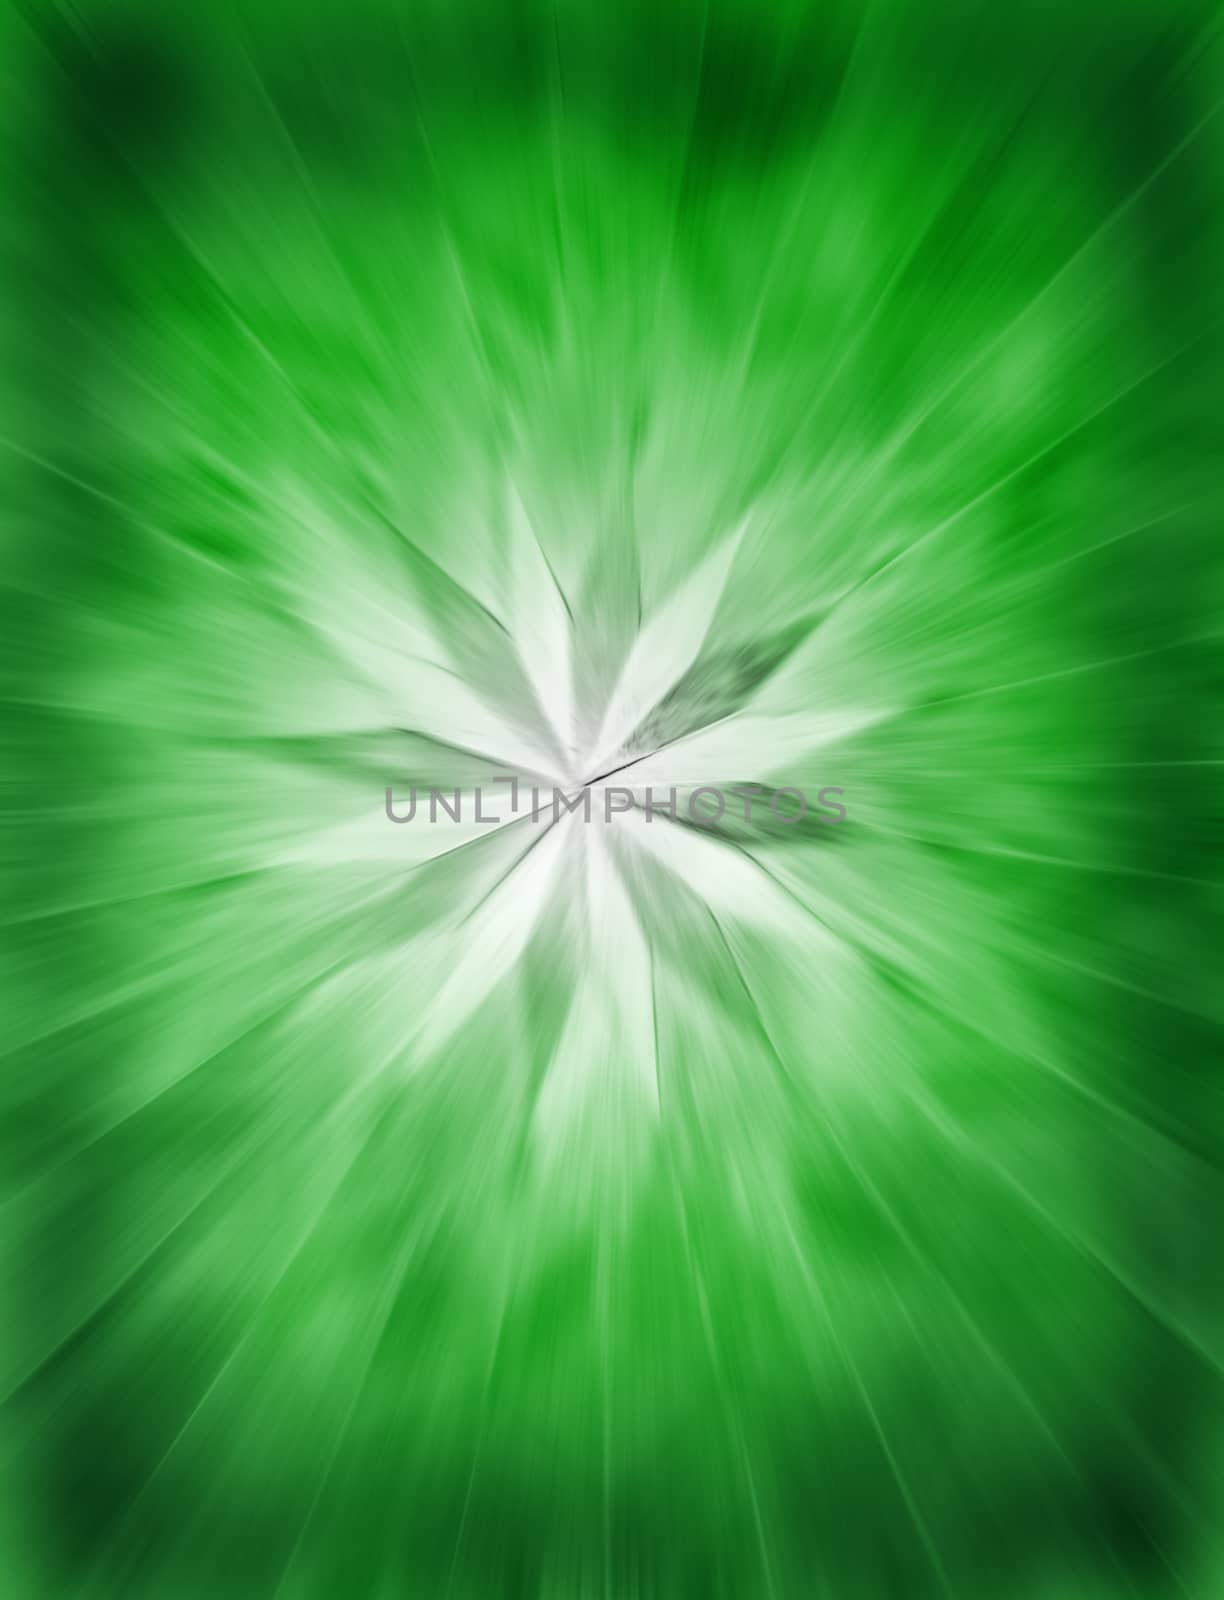 green abstract background with star